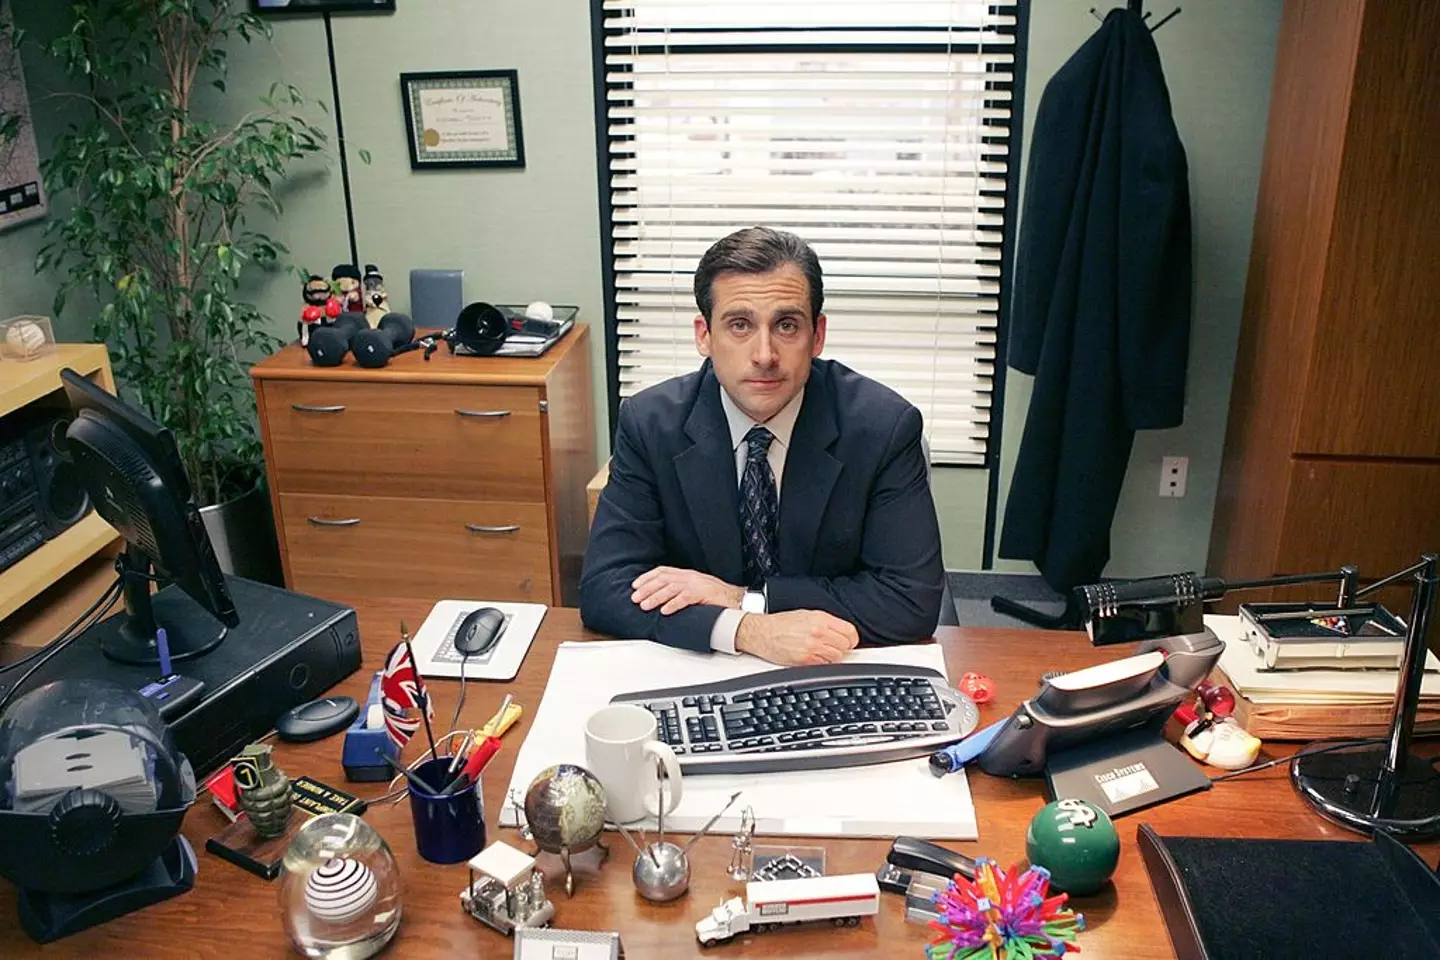 Steve Carell starred in the US version of The Office. (Chris Haston/NBCU Photo Bank)